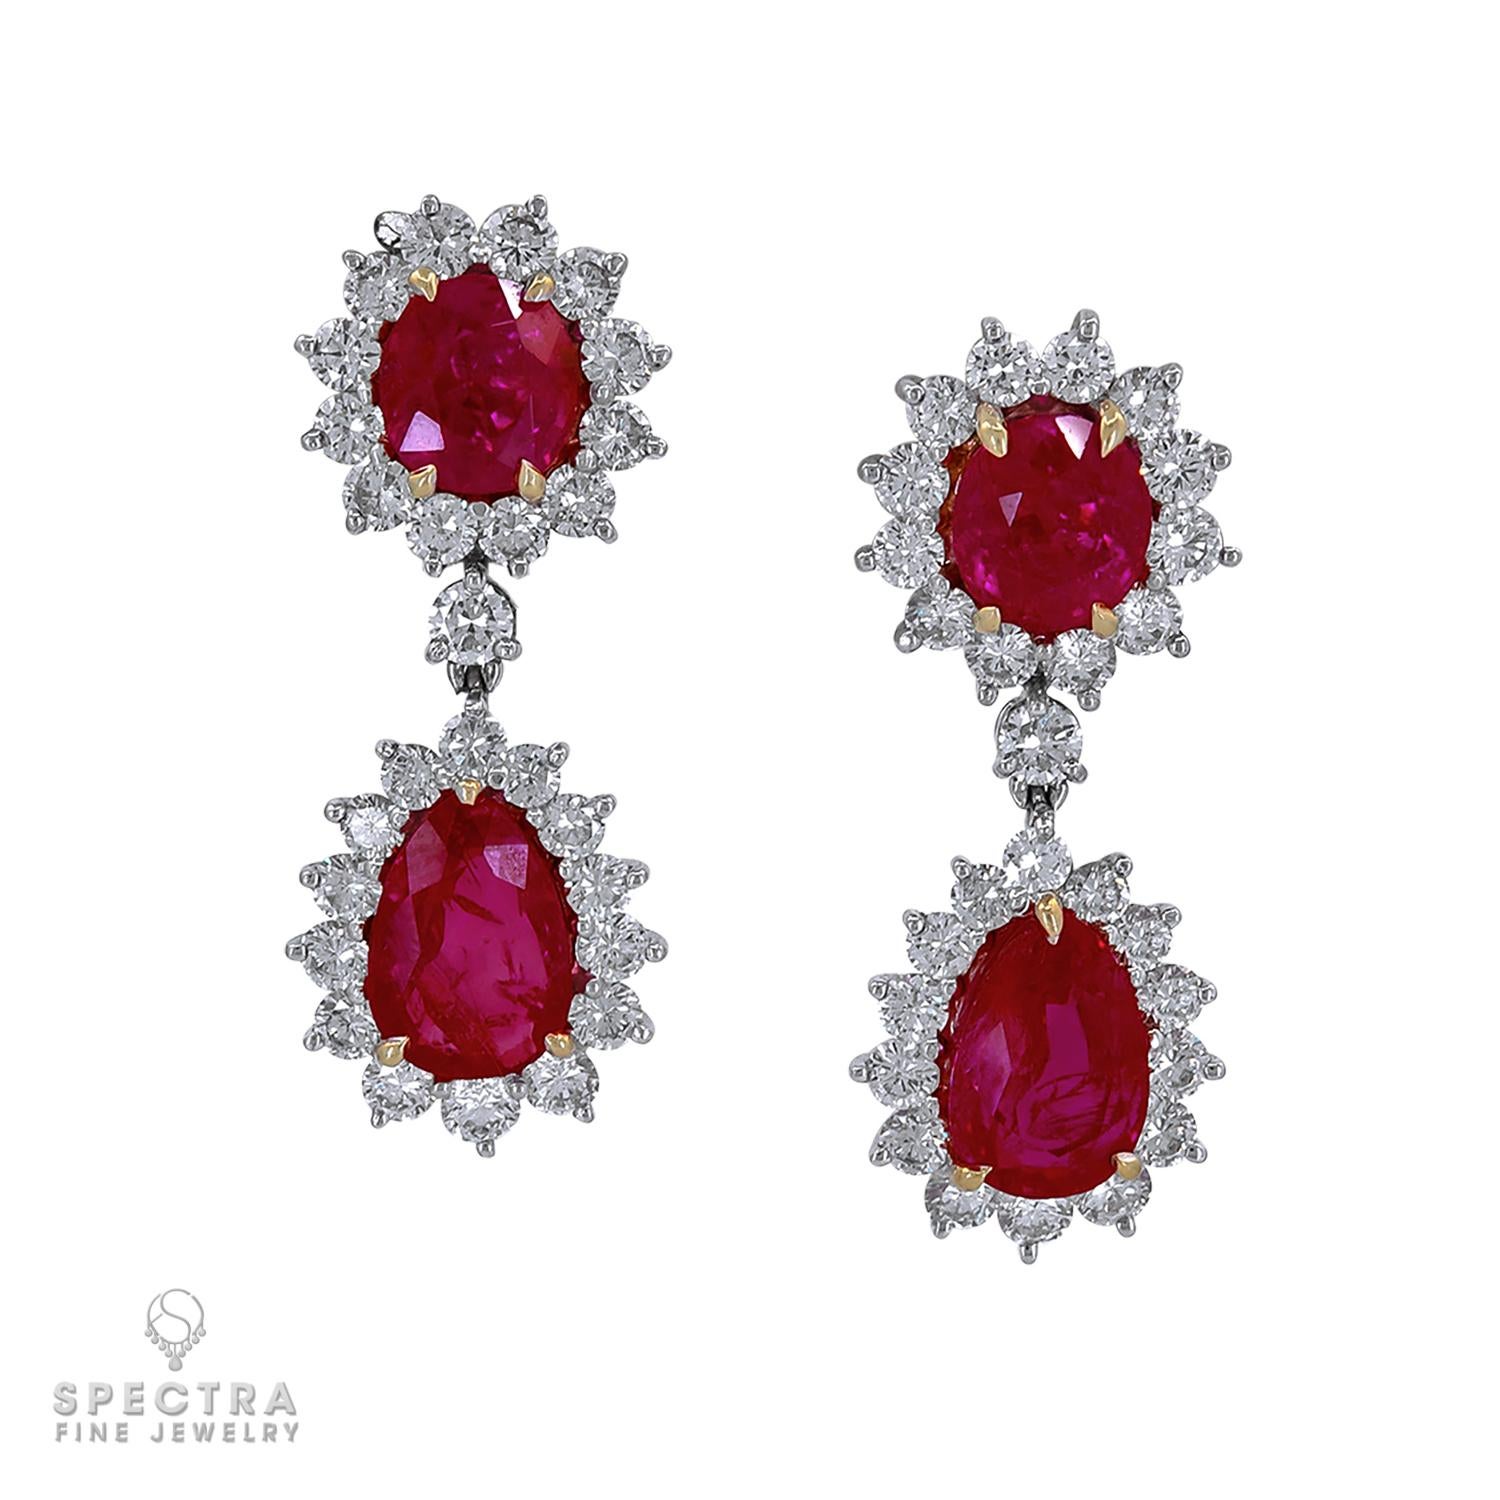 A beautiful pair of earrings adorned with 2 oval and 2 pear shape pinkish-red rubies. 
All rubies are certified by the AGTA and GRS Labs with the reports, stating that the rubies are unheated Burmese, pinkish-red color.

Total weight of rubies is